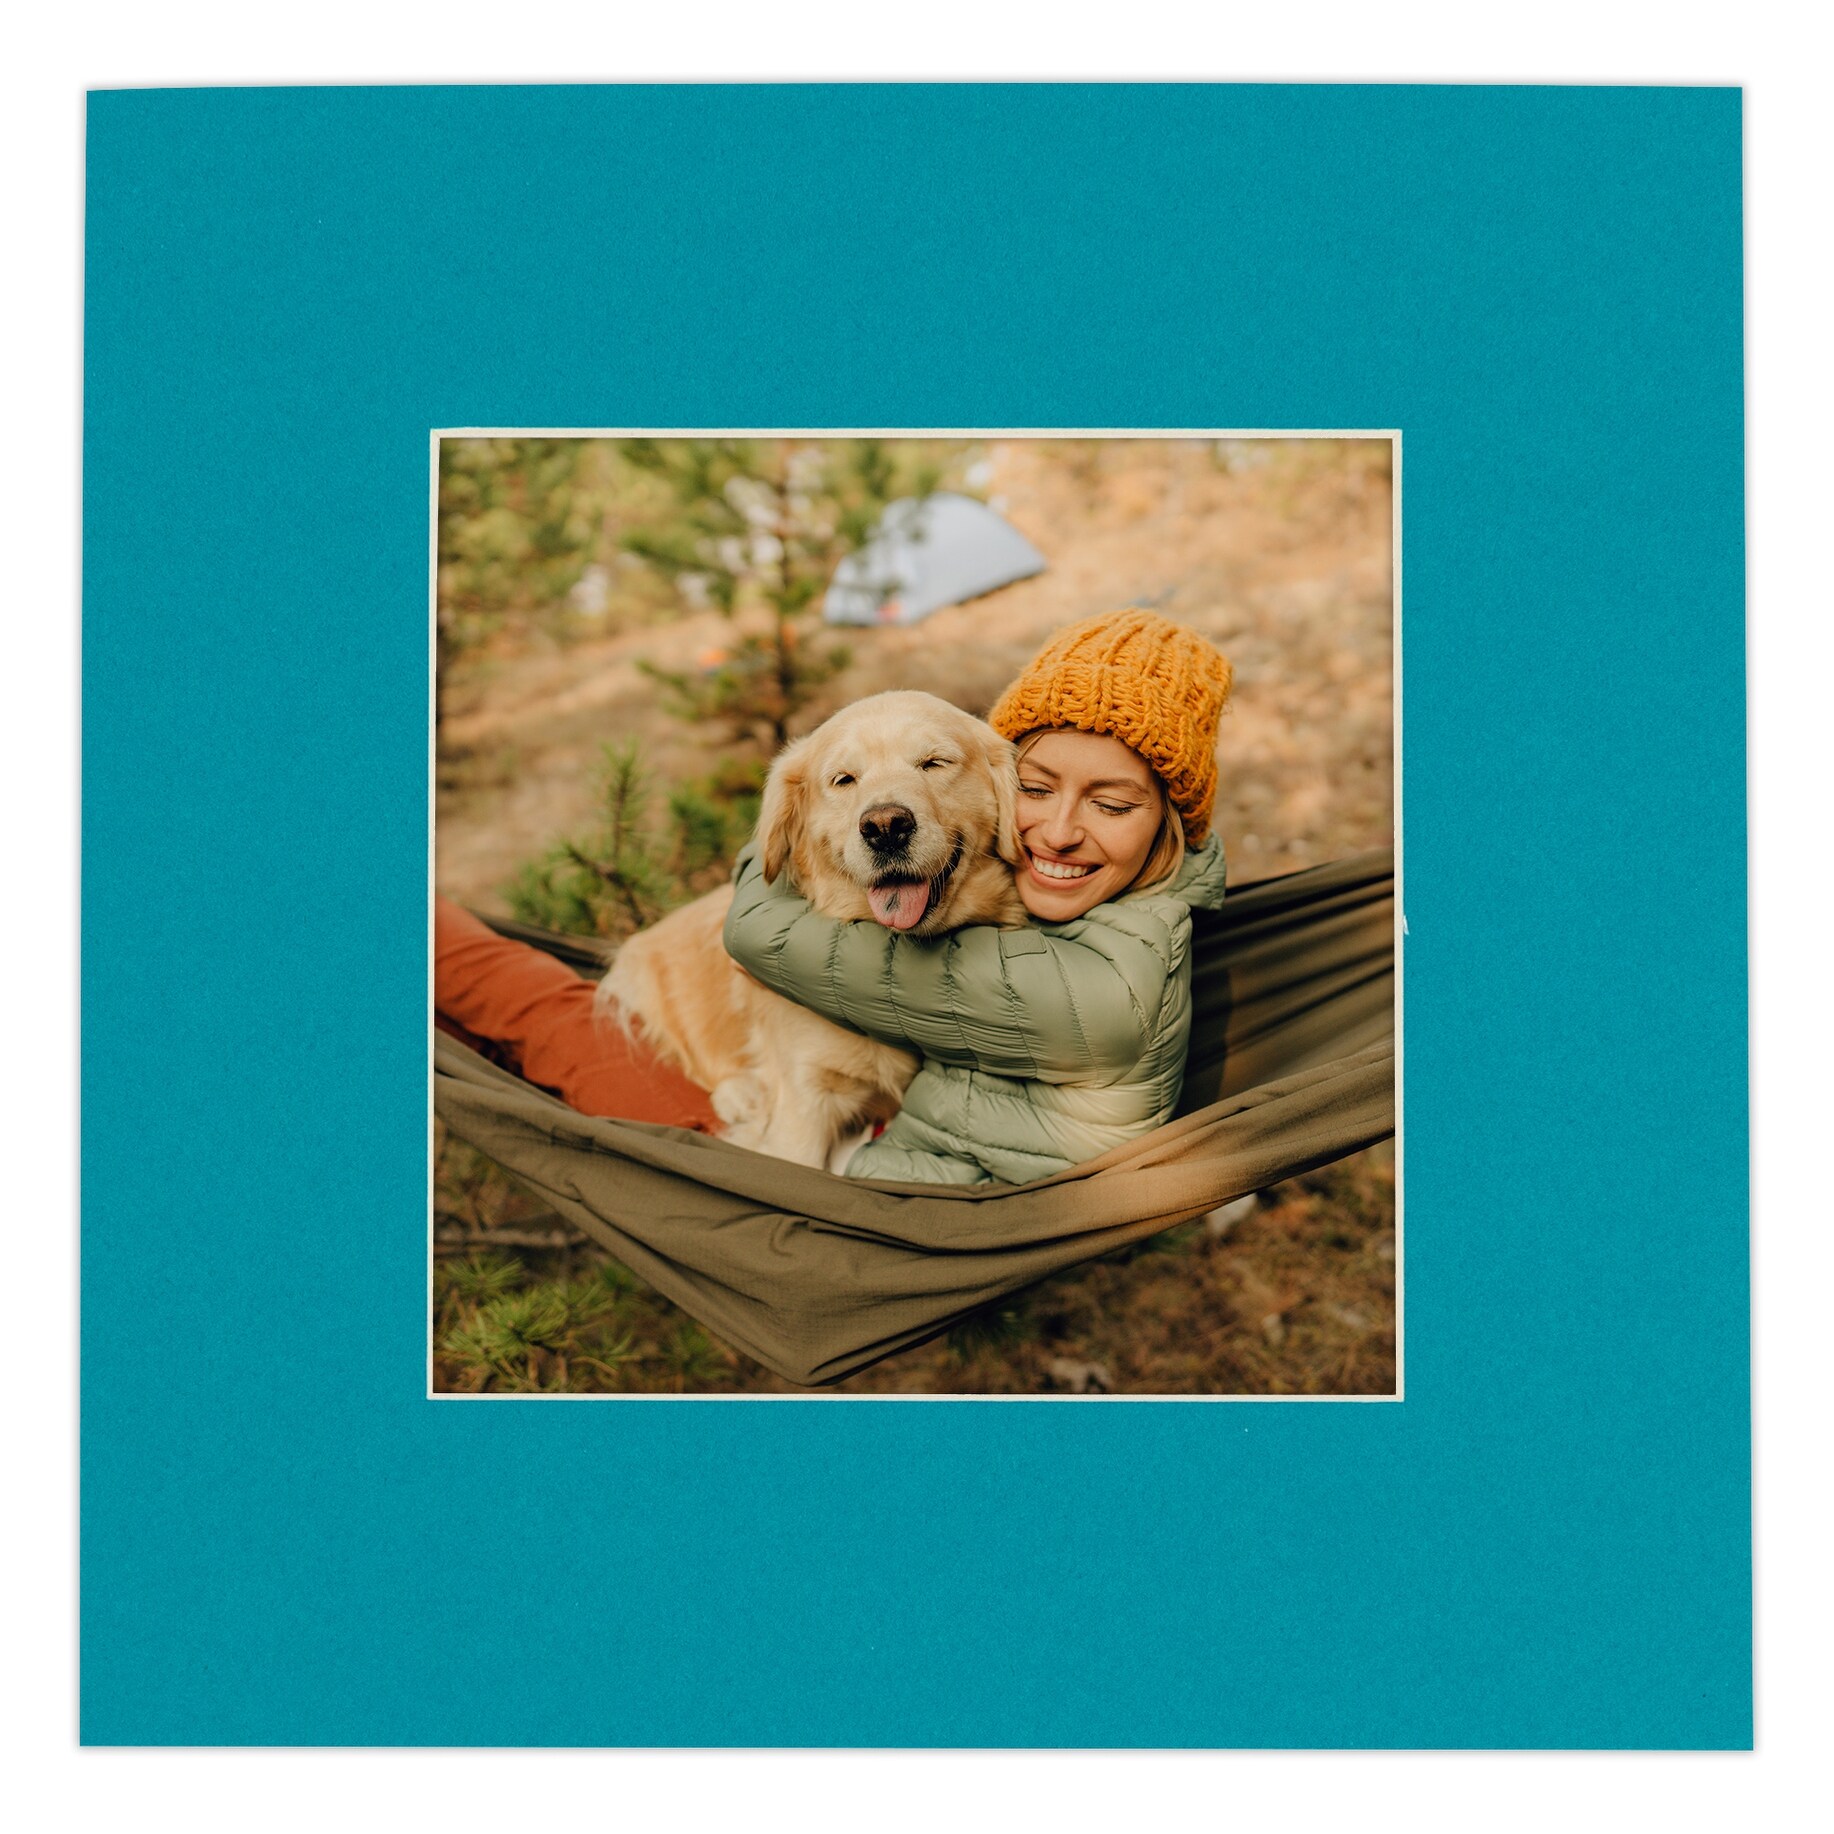  18x24 Mat for 12x18 Photo - Precut White on White Double Mat  Picture Matboard for Frames Measuring 18 x 24 Inches - Bevel Cut Matte to  Display Art Measuring 12 x